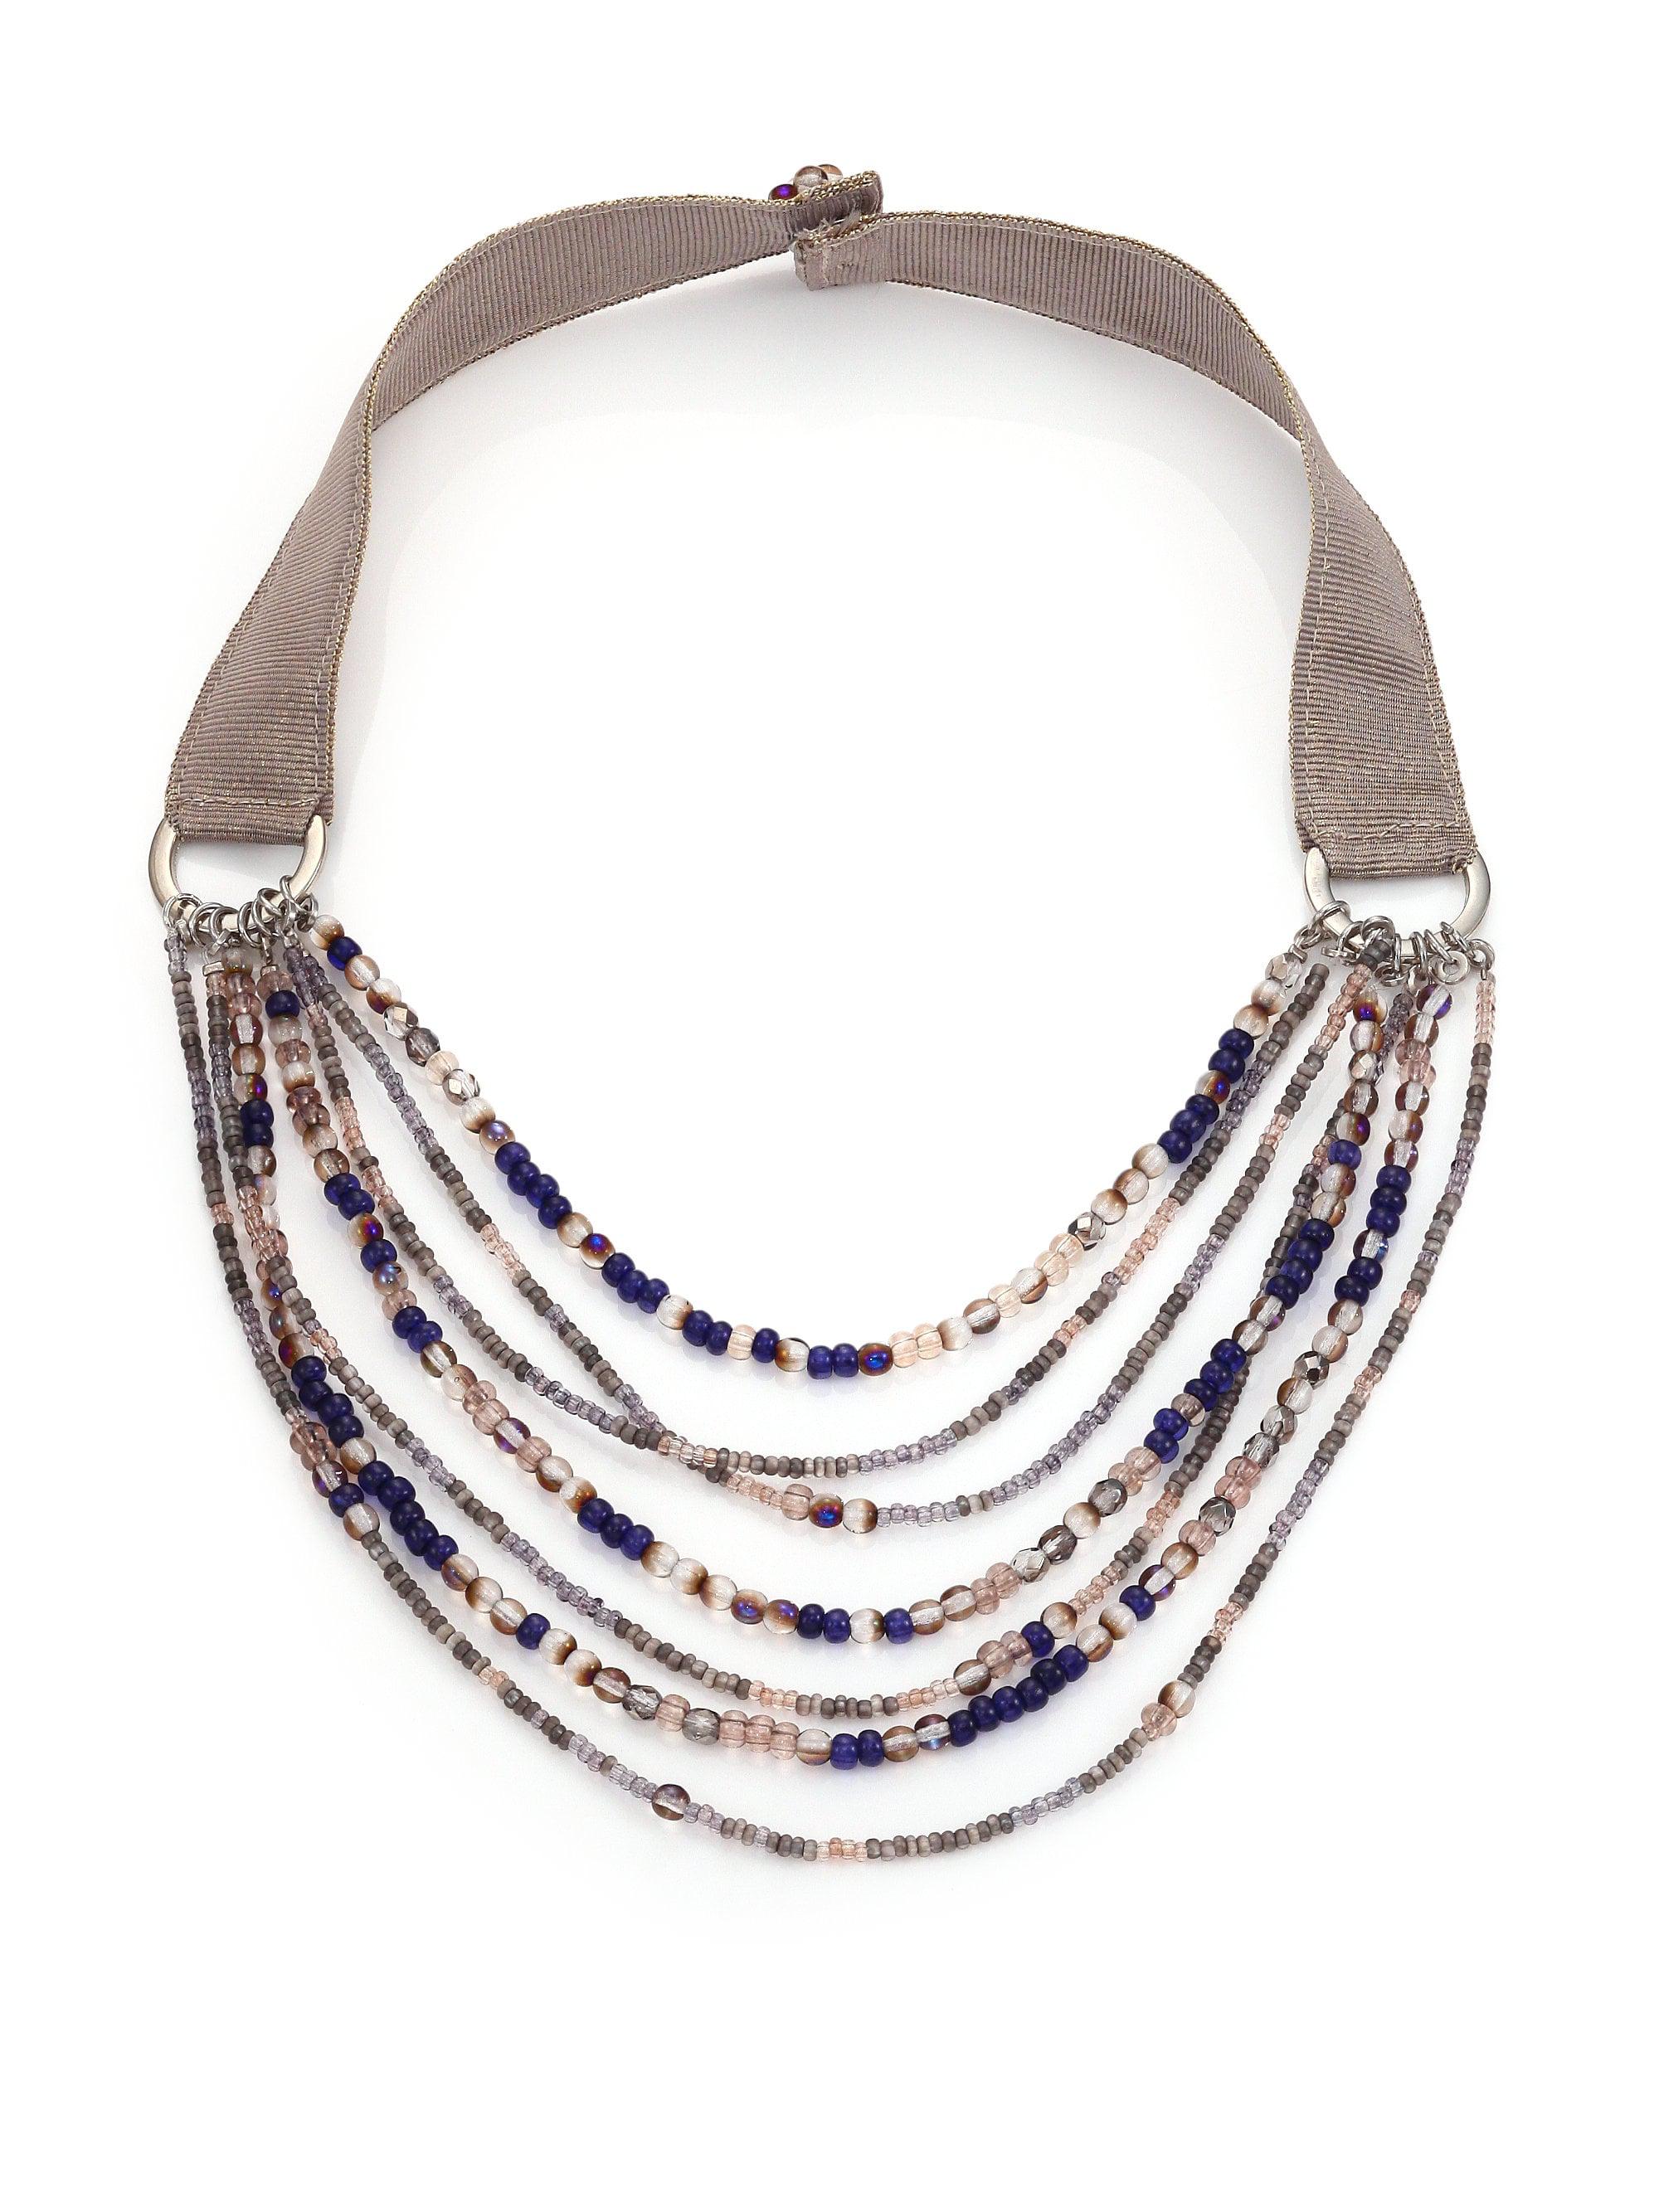 Lyst - Peserico Mutlistrand Beadaed Necklace in Blue